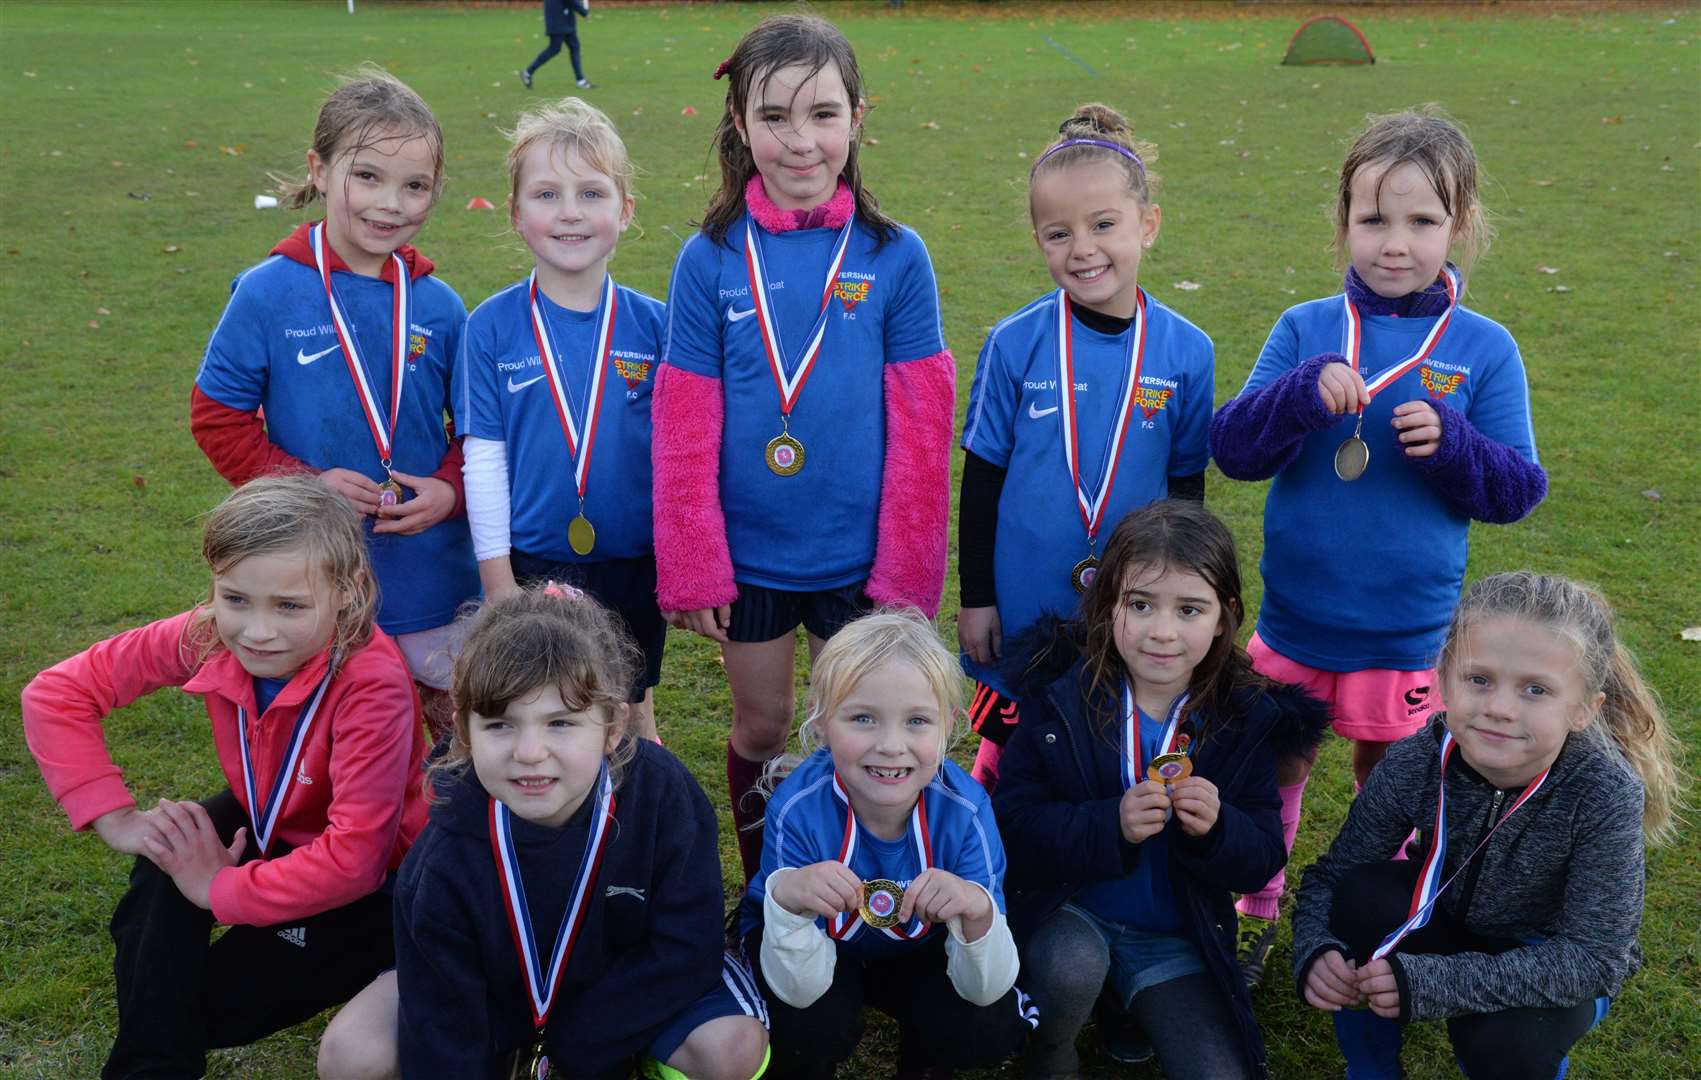 The Faversham Strike Force Thunder and Lightning under-8 teams who took part in their girls football festival in Faversham in 2018. Picture: Chris Davey